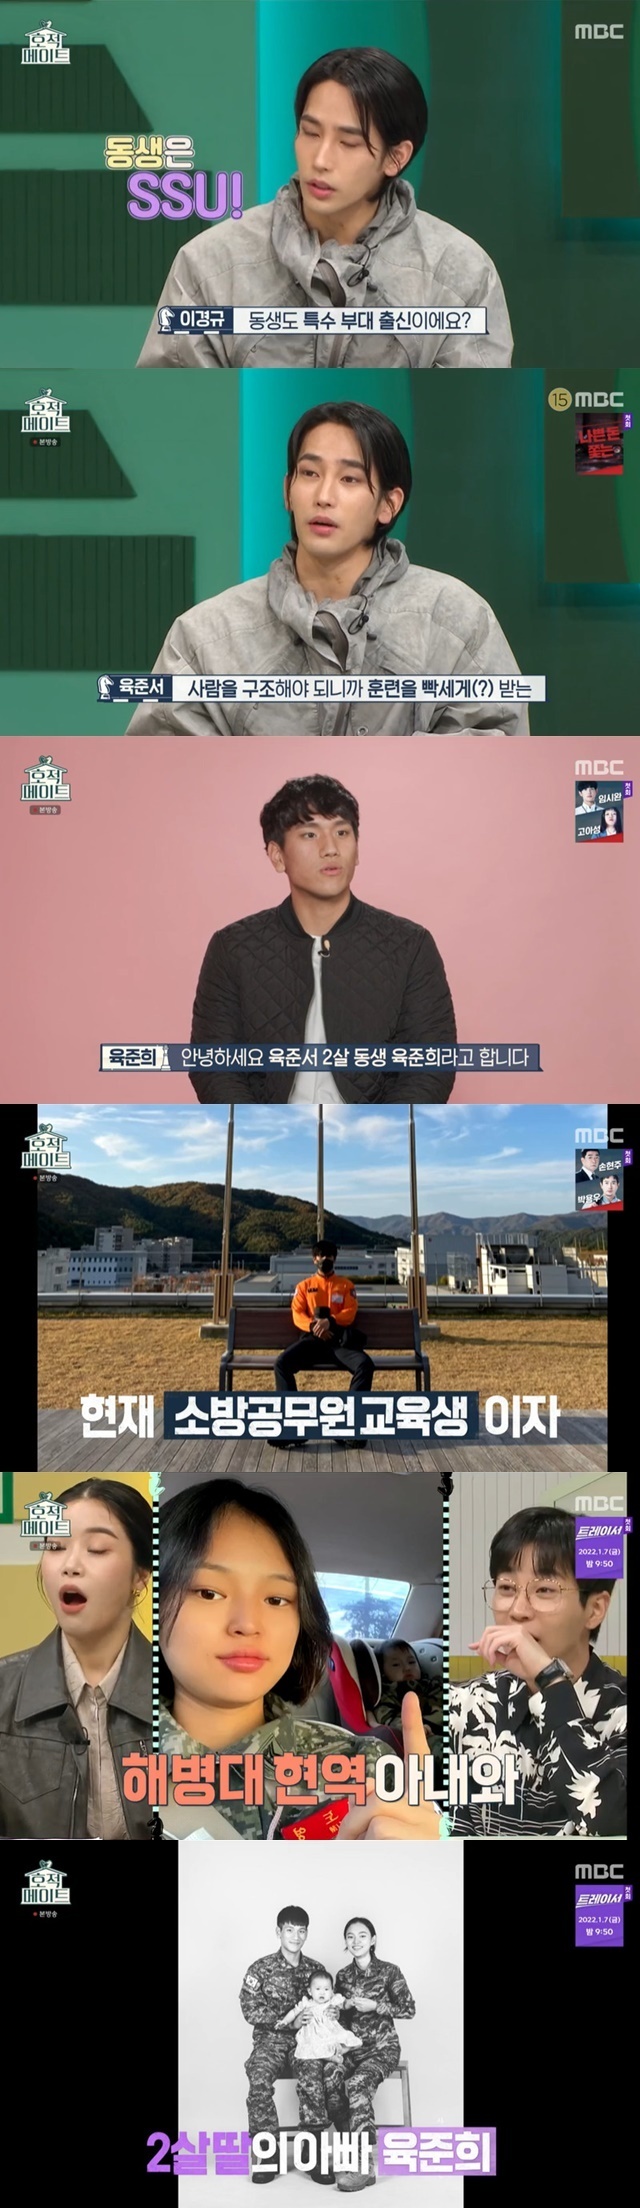 Yook Jun-seo unveiled his two-year-old brother, Yook Jun-hee and his wife.In MBCs Family Mate, which was broadcast on January 4, brothers Yook Jun-seo and Yook Jun-hee appeared.My brother is from a rescue team called SSU, and he has to rescue people, so he has to train hard, he explained about his brother, Yook Jun-hee.In the video, Yoo Joon-seo went to Pohang to meet his brother Yoo Jun-hee, and Yoo Jun-hee said, Yuk Jun-seo is his 2-year-old brother.He was a former member of the Marine Rescue Squadron and is currently being trained as a fire-fighting officer. He has a wife who works in Marines and is a father with a two-year-old daughter. Lee Kyung-kyu admired the idea of a family that protects the country. I applaud you.When Lee Kyung-kyu asked, How old did your brother marry? Yoo Joon-seo said, I am separated from twenty-two.